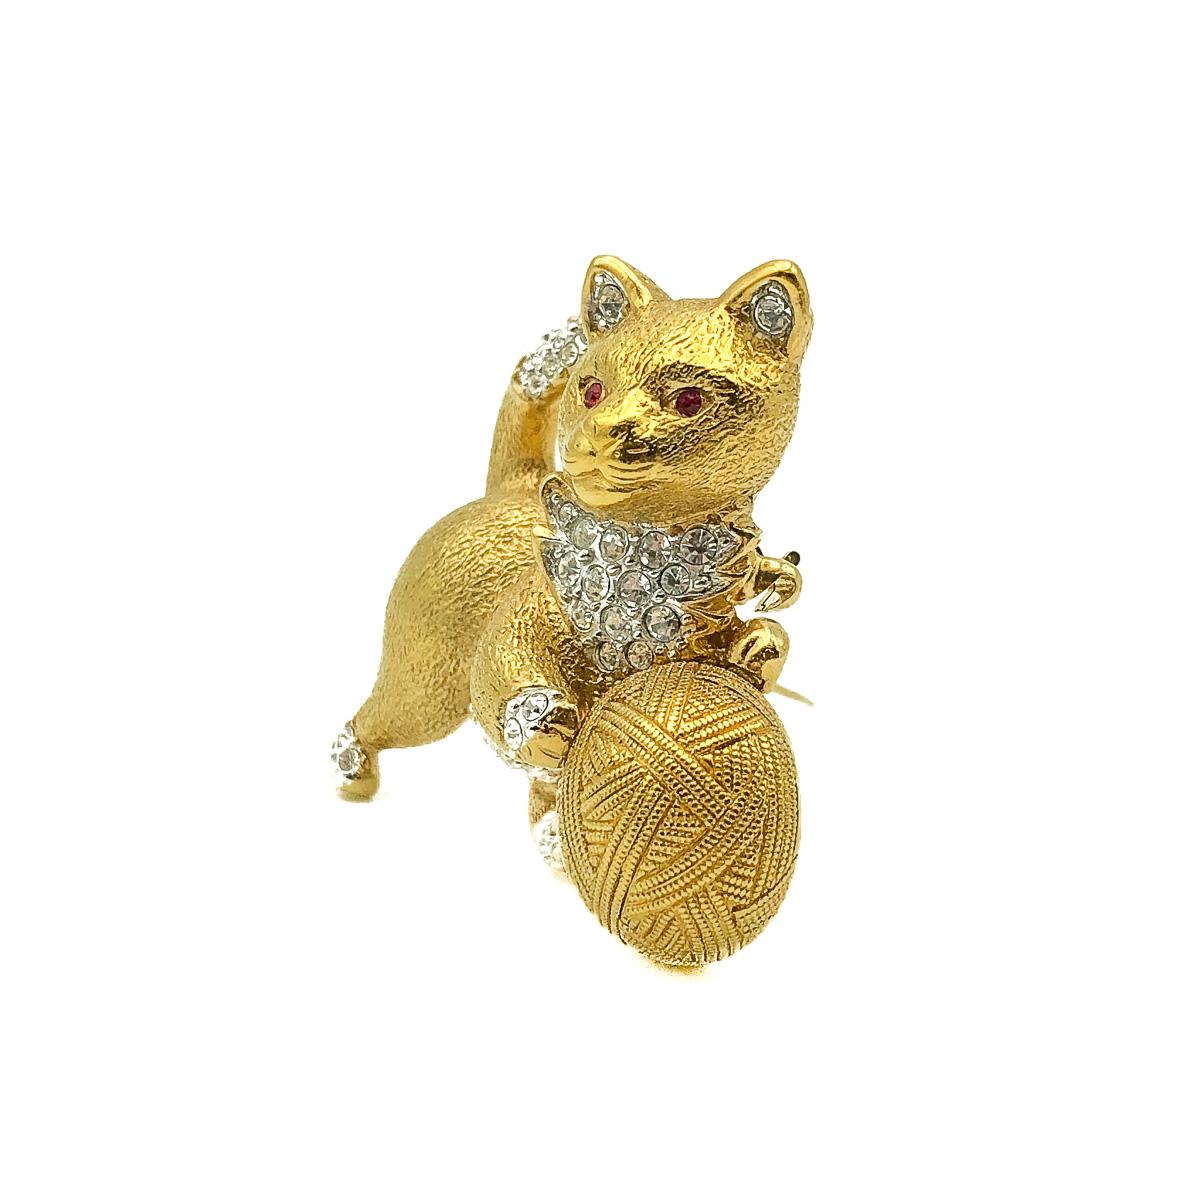 Vintage Attwood & Sawyer Cat Brooch, Crafted in gold plated metal and crystals. Featuring a crystal embellished cat or kitten playing with a large ball of wool. In very good vintage condition, signed and approx. 4.5cm. A whimsical pin perfect for a